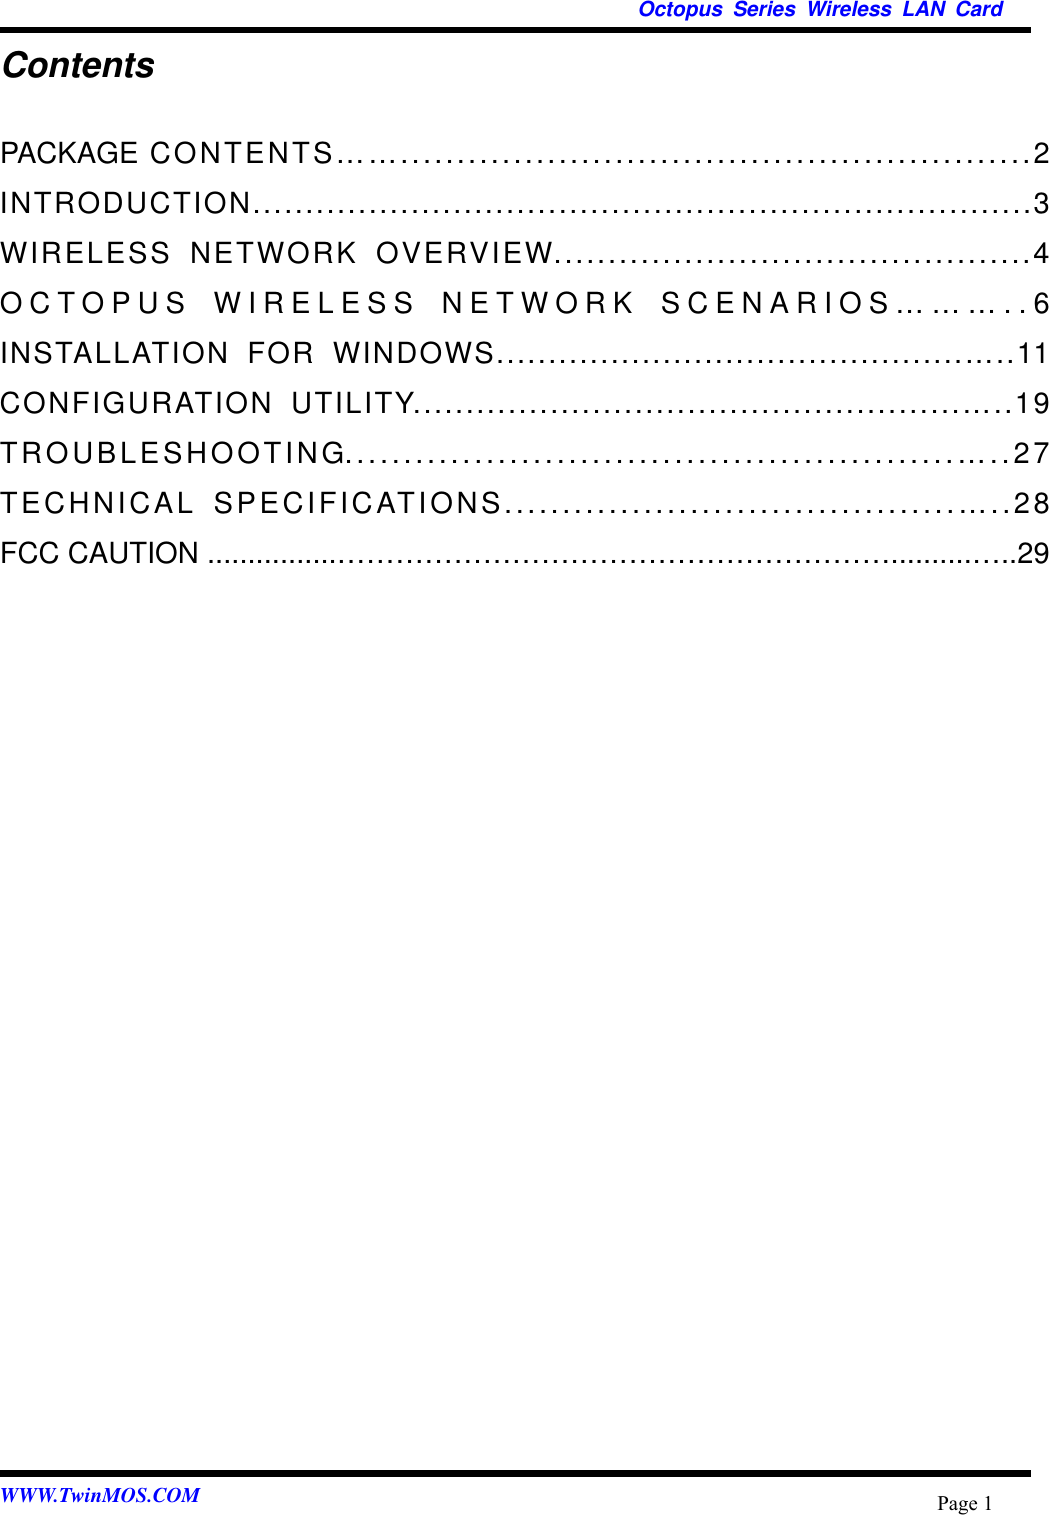   Octopus Series Wireless LAN Card  WWW.TwinMOS.COM  Page 1Contents PACKAGE CONTENTS……........................................................2 INTRODUCTION..........................................................................3 WIRELESS NETWORK OVERVIEW............................................4 OCTOPUS WIRELESS NETWORK SCENARIOS………..6 INSTALLATION FOR WINDOWS.............................................…..11 CONFIGURATION UTILITY....................................................…..19 TROUBLESHOOTING....................................................…..27 TECHNICAL SPECIFICATIONS.......................................…..28 FCC CAUTION ................…………………………………………………..........…..29  